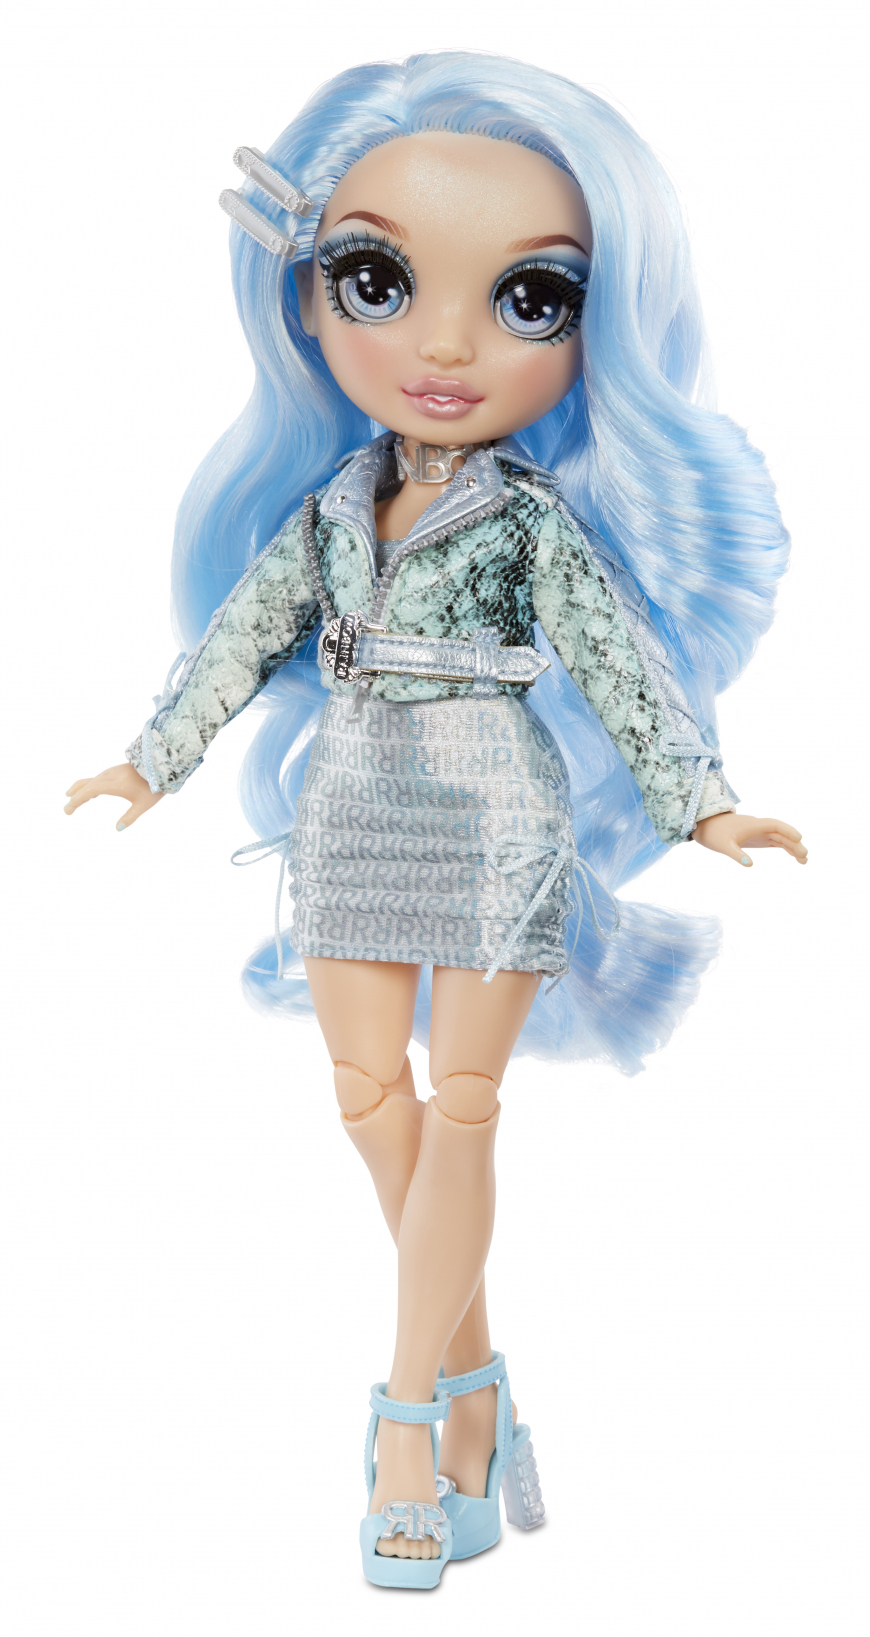 Rainbow High Series 3 Ice doll Gabriella Icely doll In second outfit